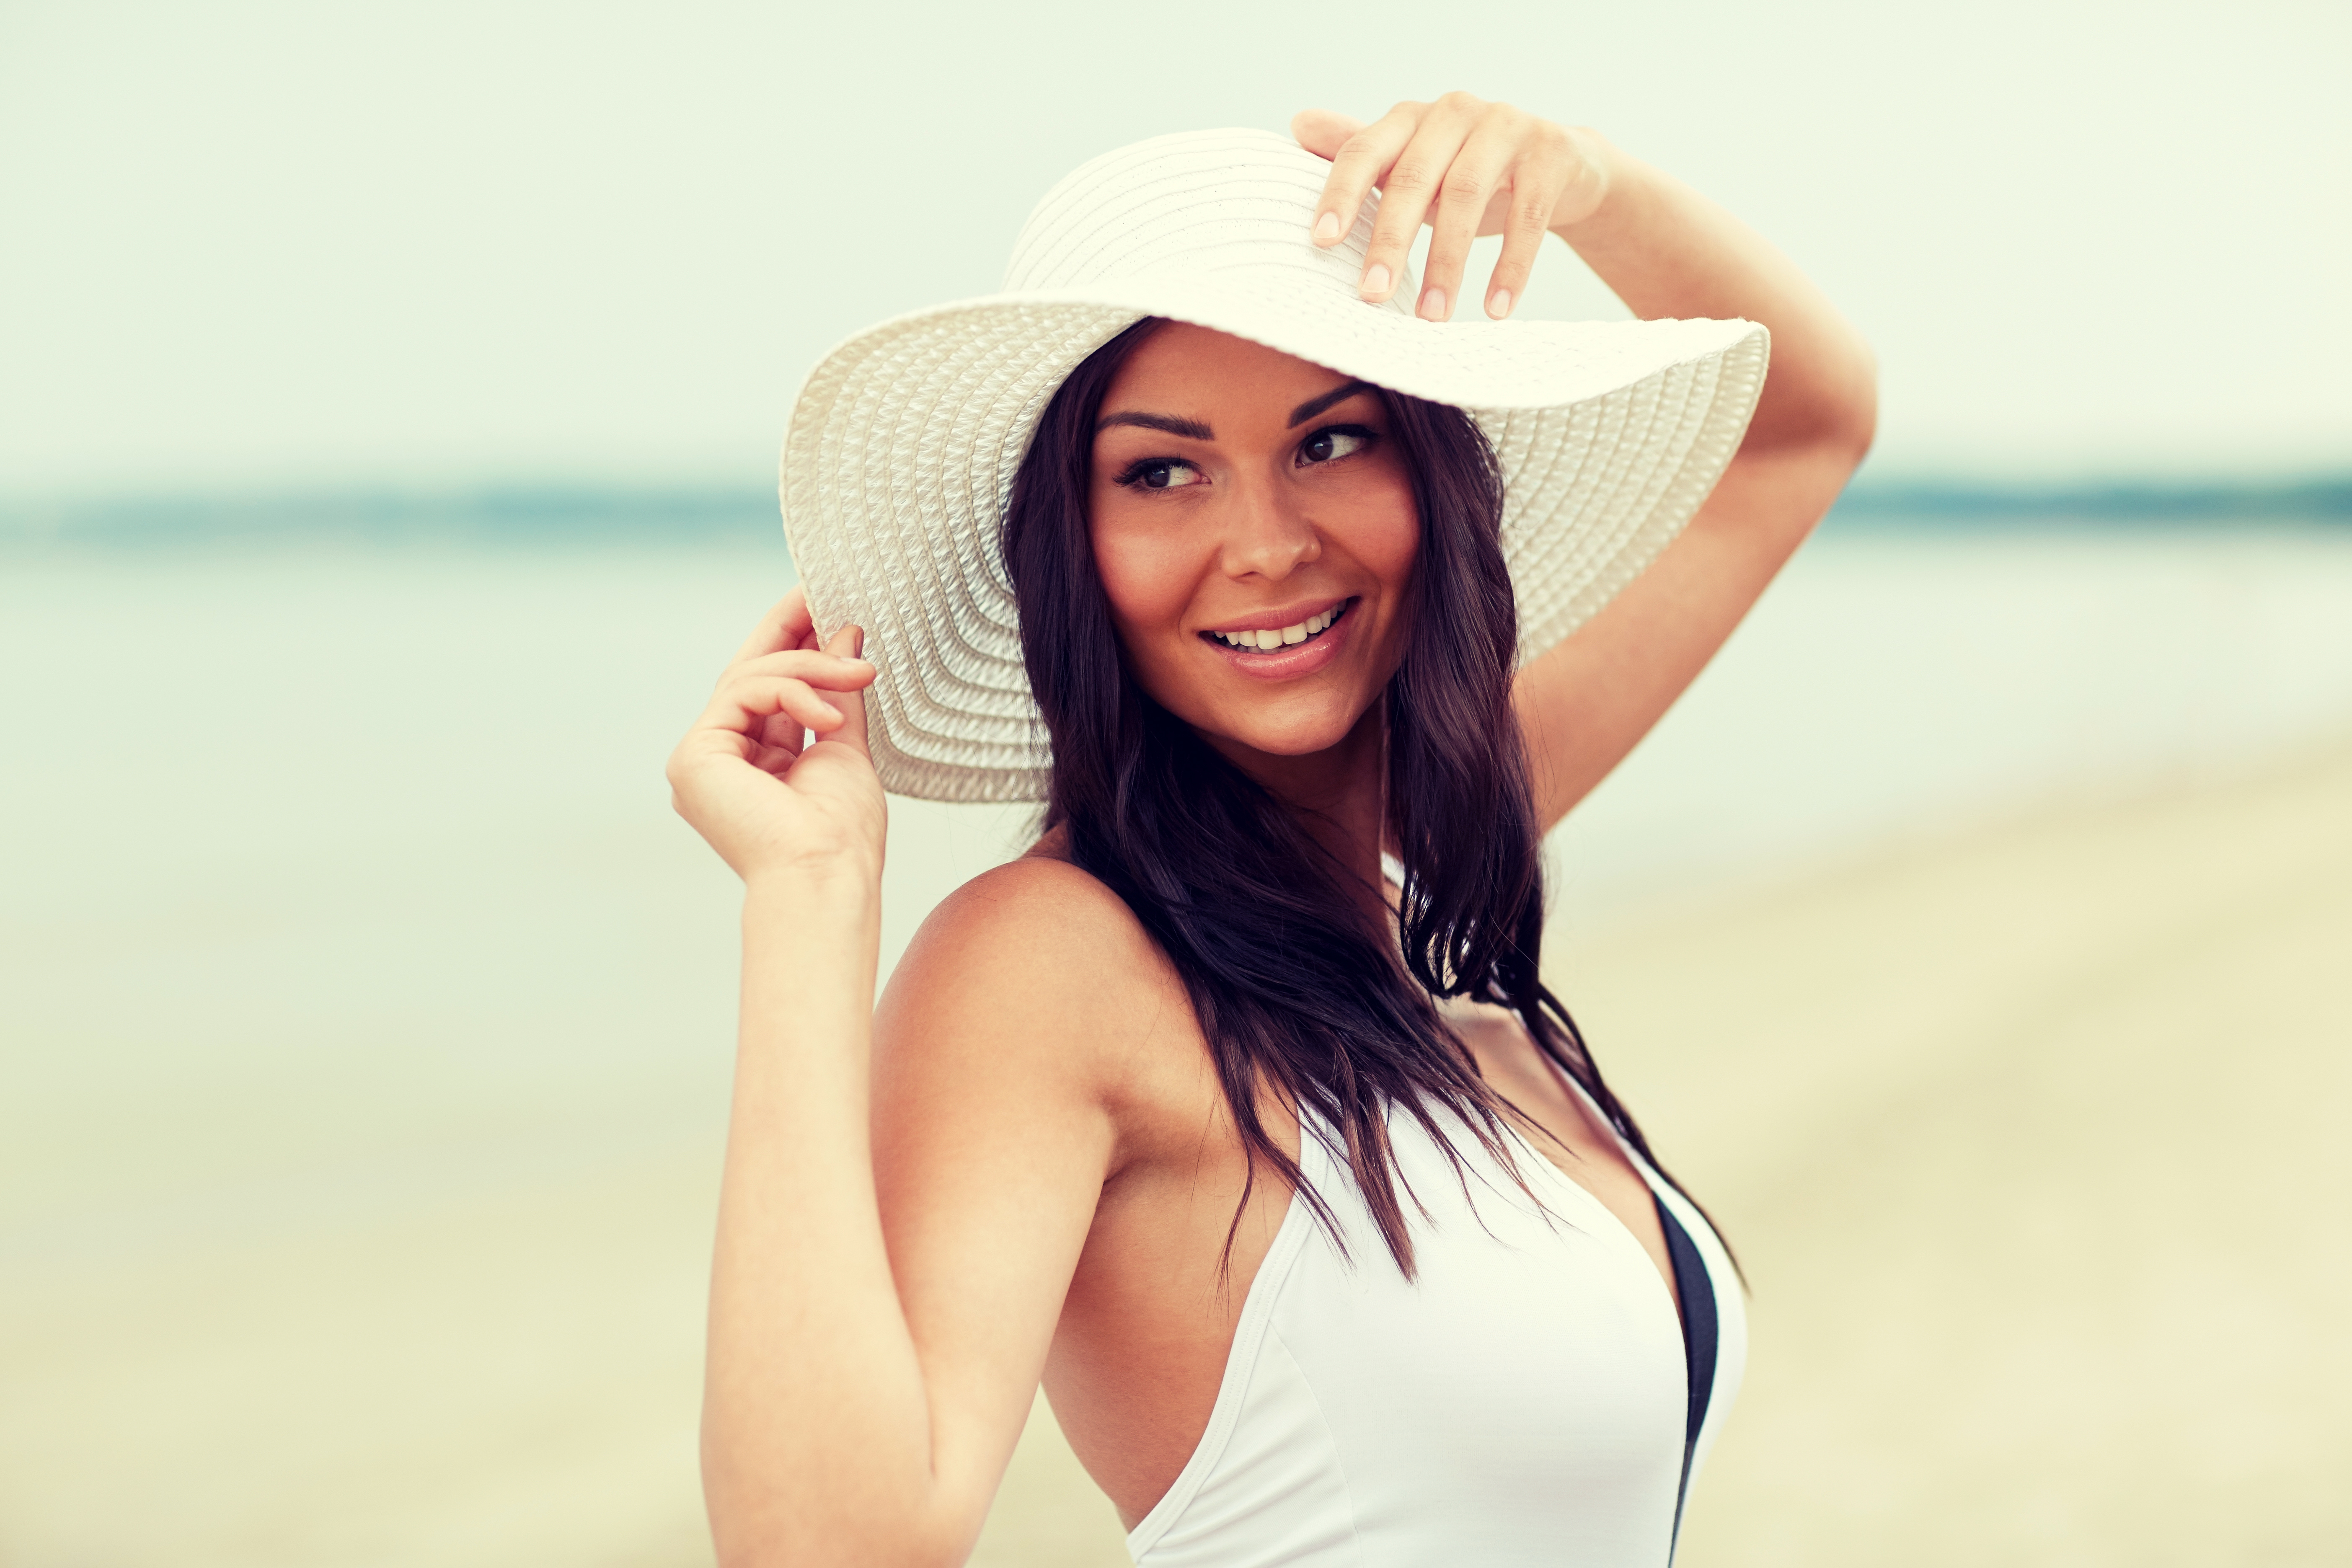 How to have a happy face - Plastic Surgery and beauty tips Breast Augmentation Surgery can give women the confidence to go to the beach and wear a bikini.